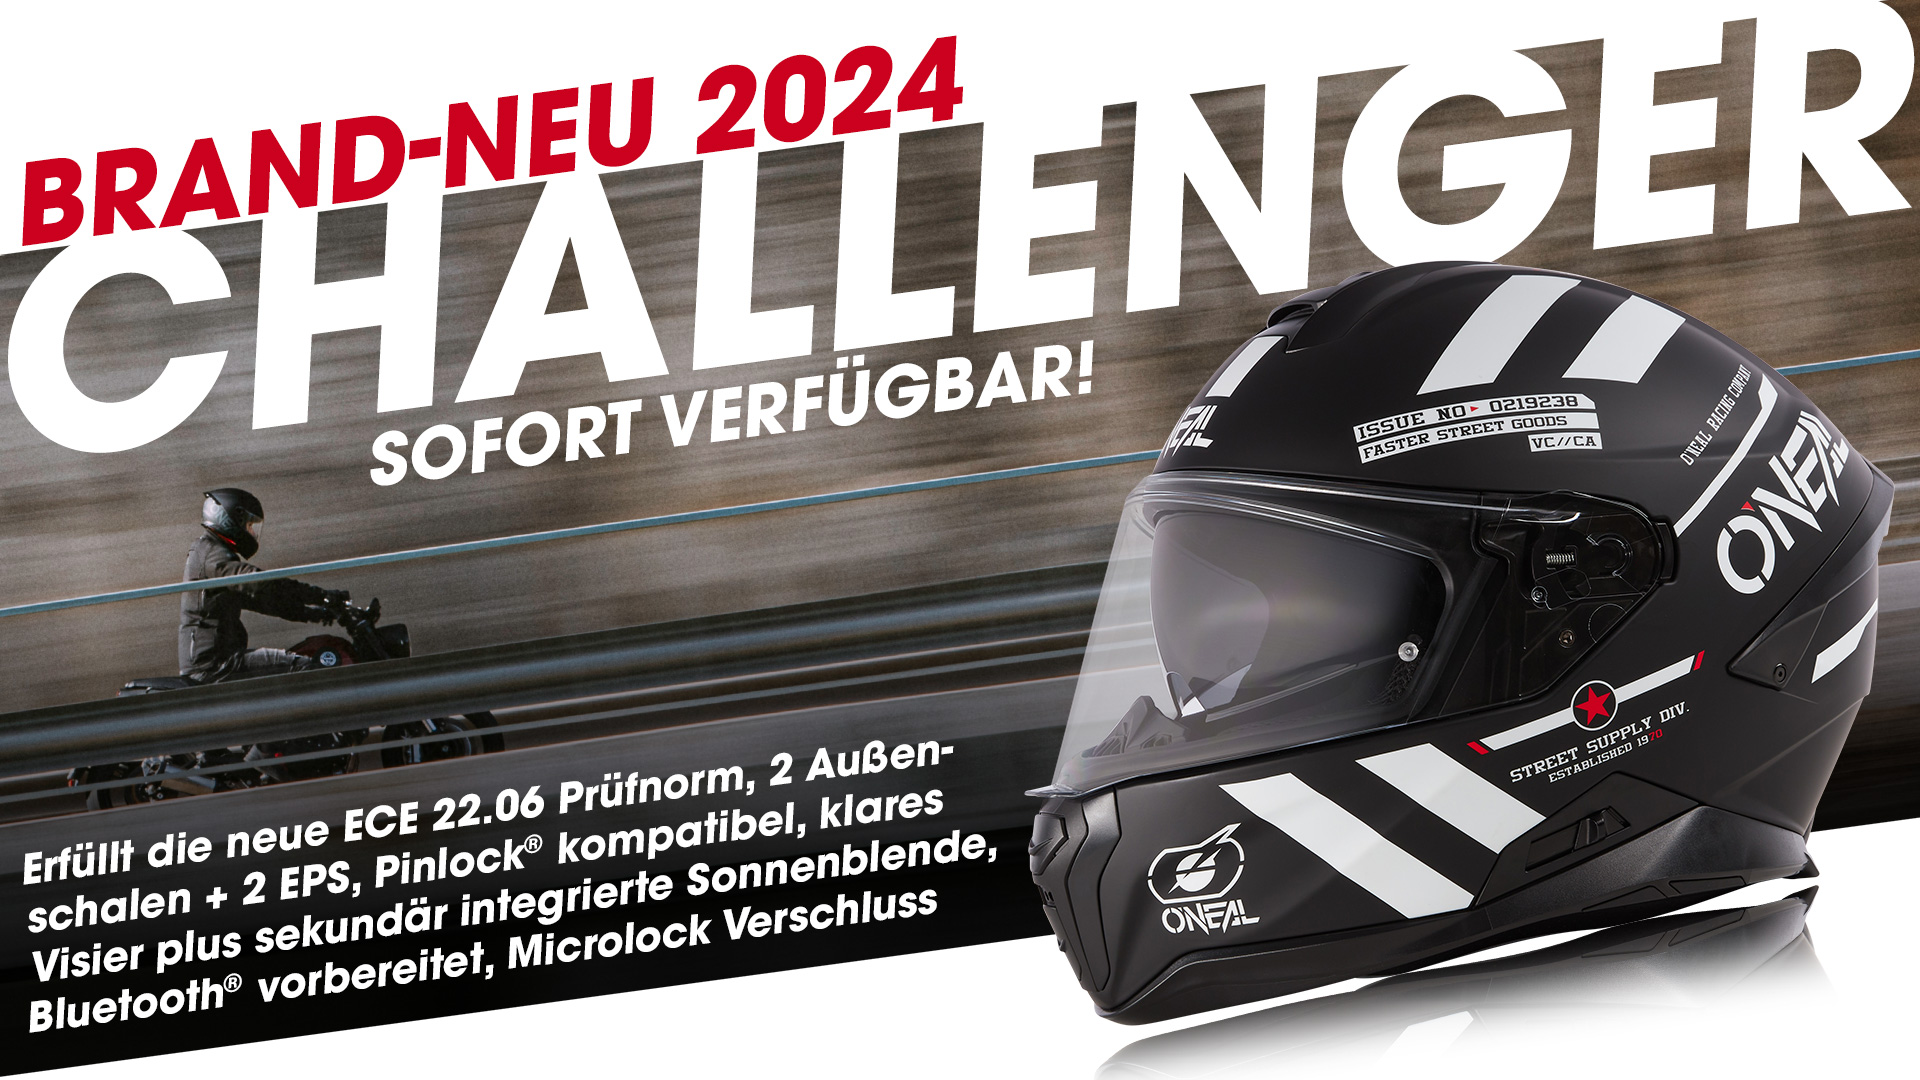 Oneal Challenger Helme 2014